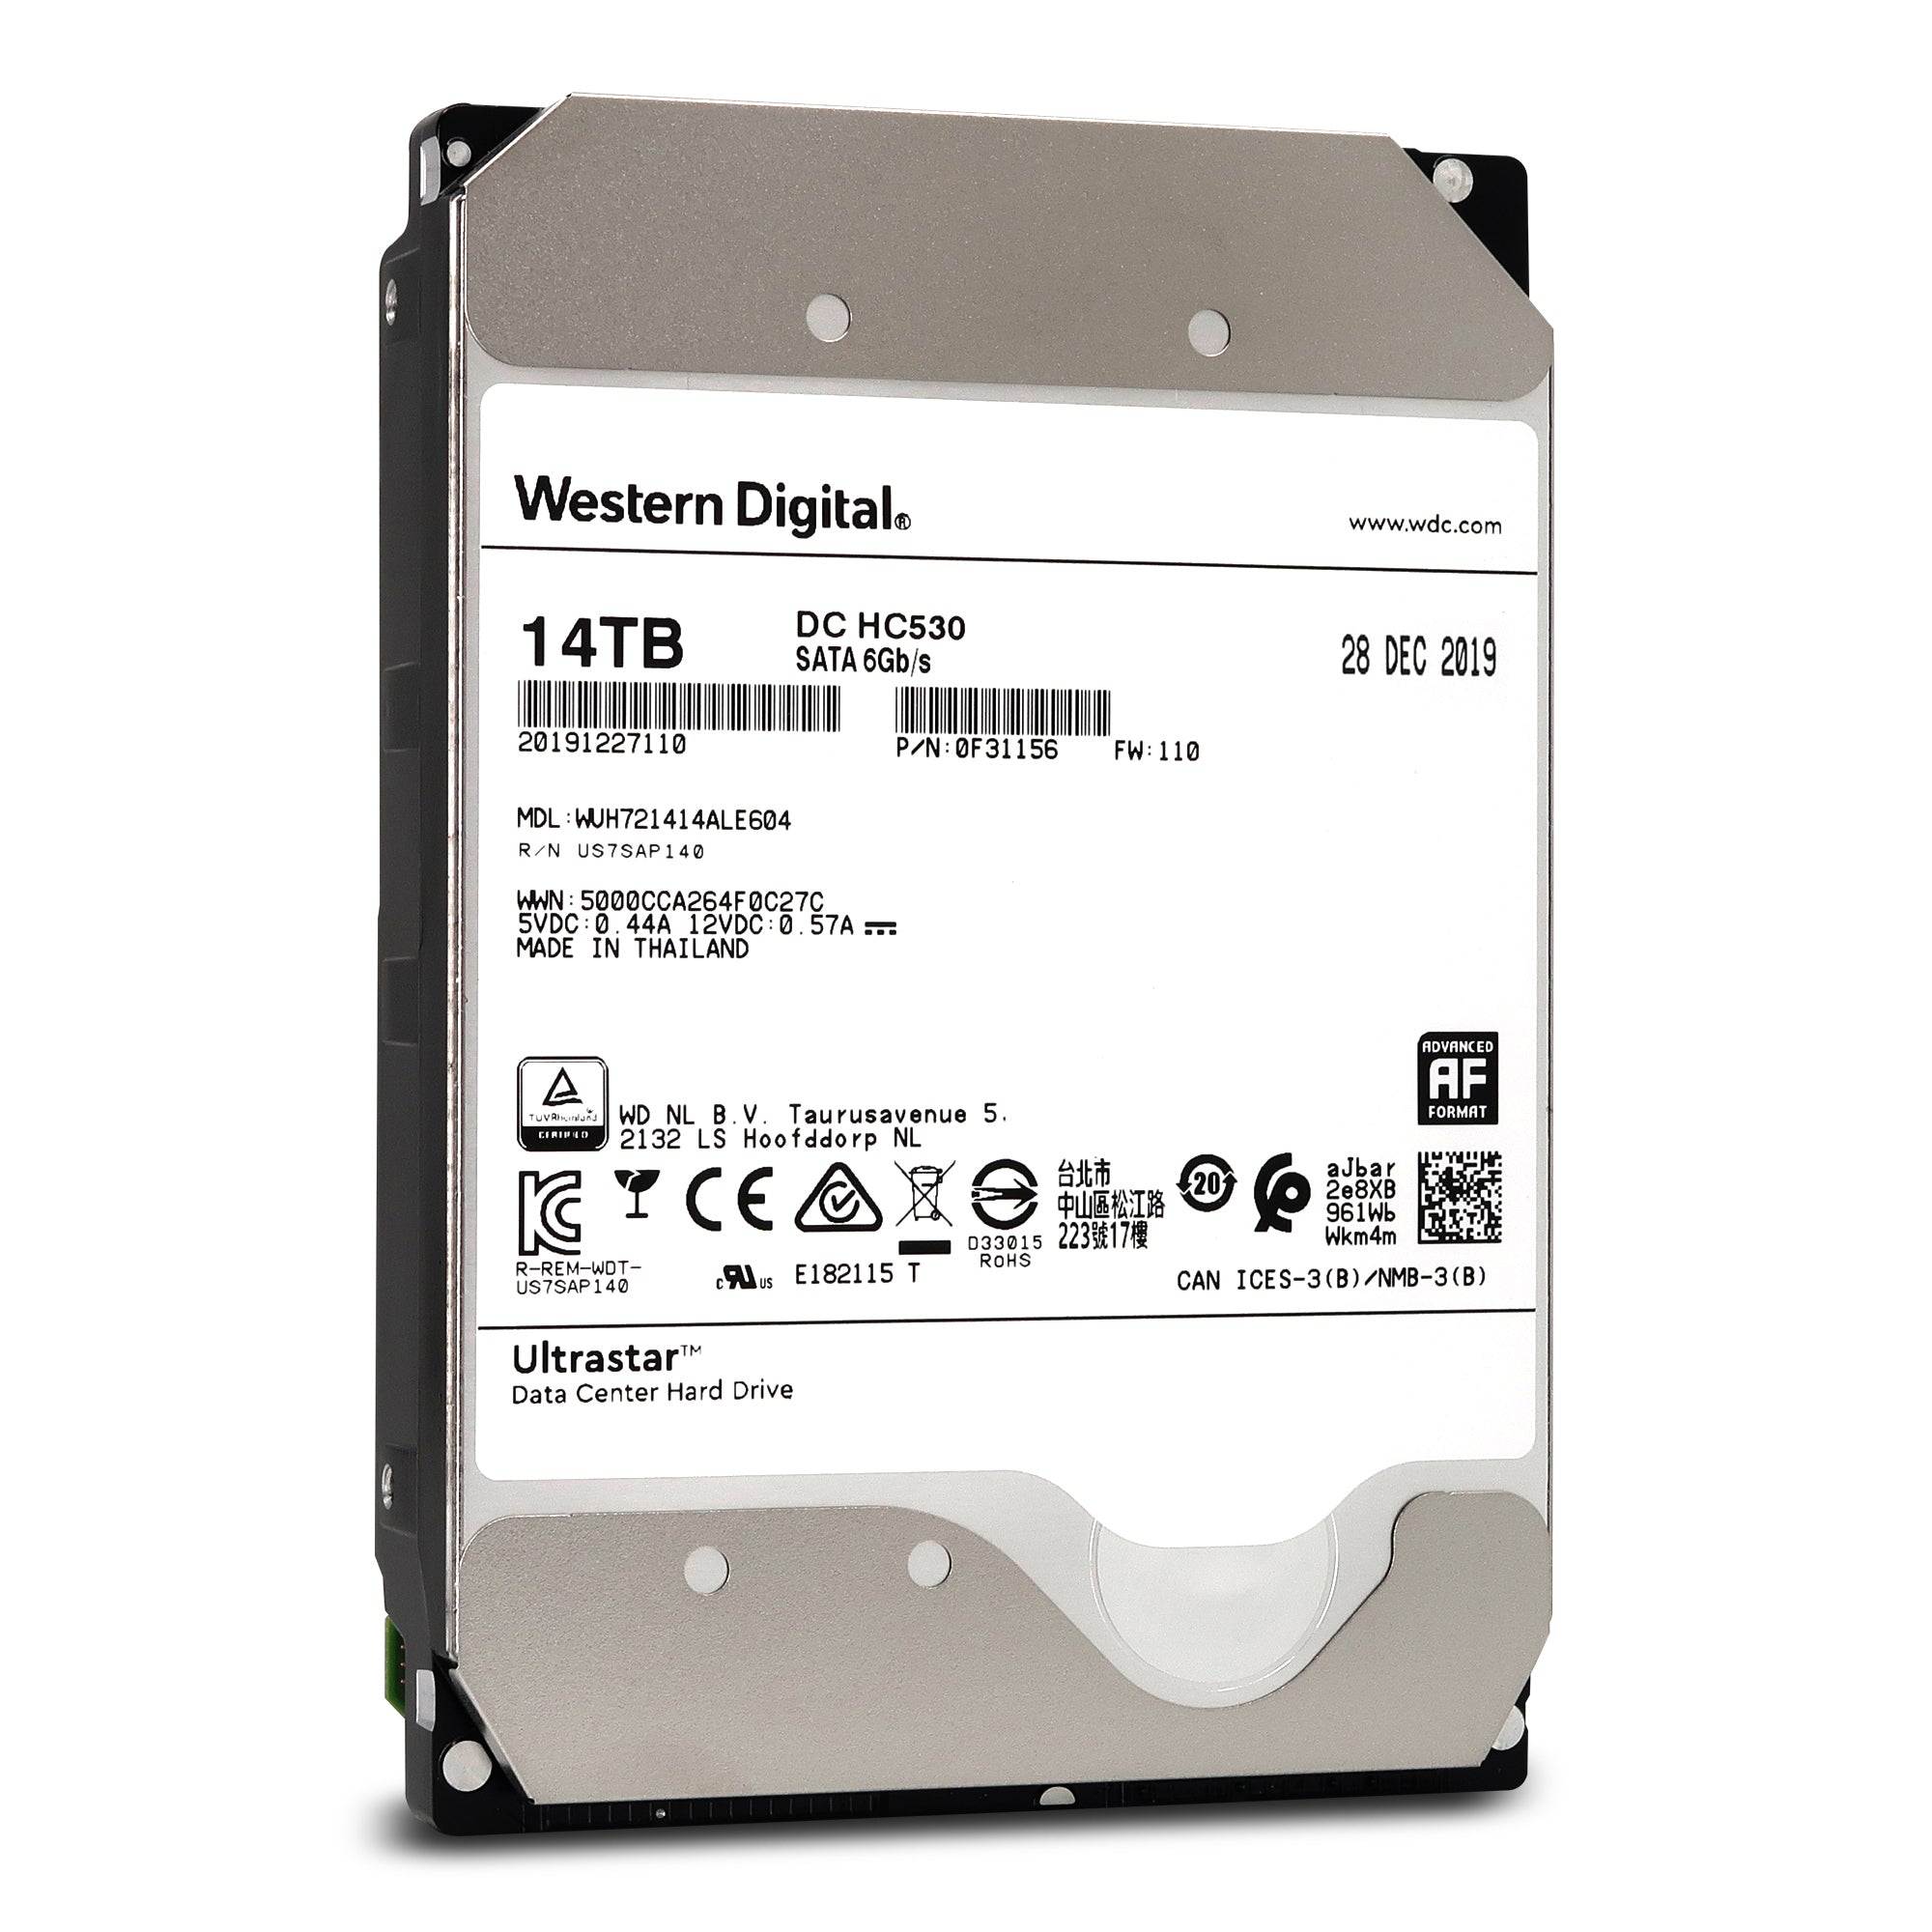 Western Digital Ultrastar DC HC530 WUH721414ALE604 0F31156 14TB 7.2K RPM SATA 6Gb/s 512e SE Power Disable Pin 3.5in Refurbished HDD Front View